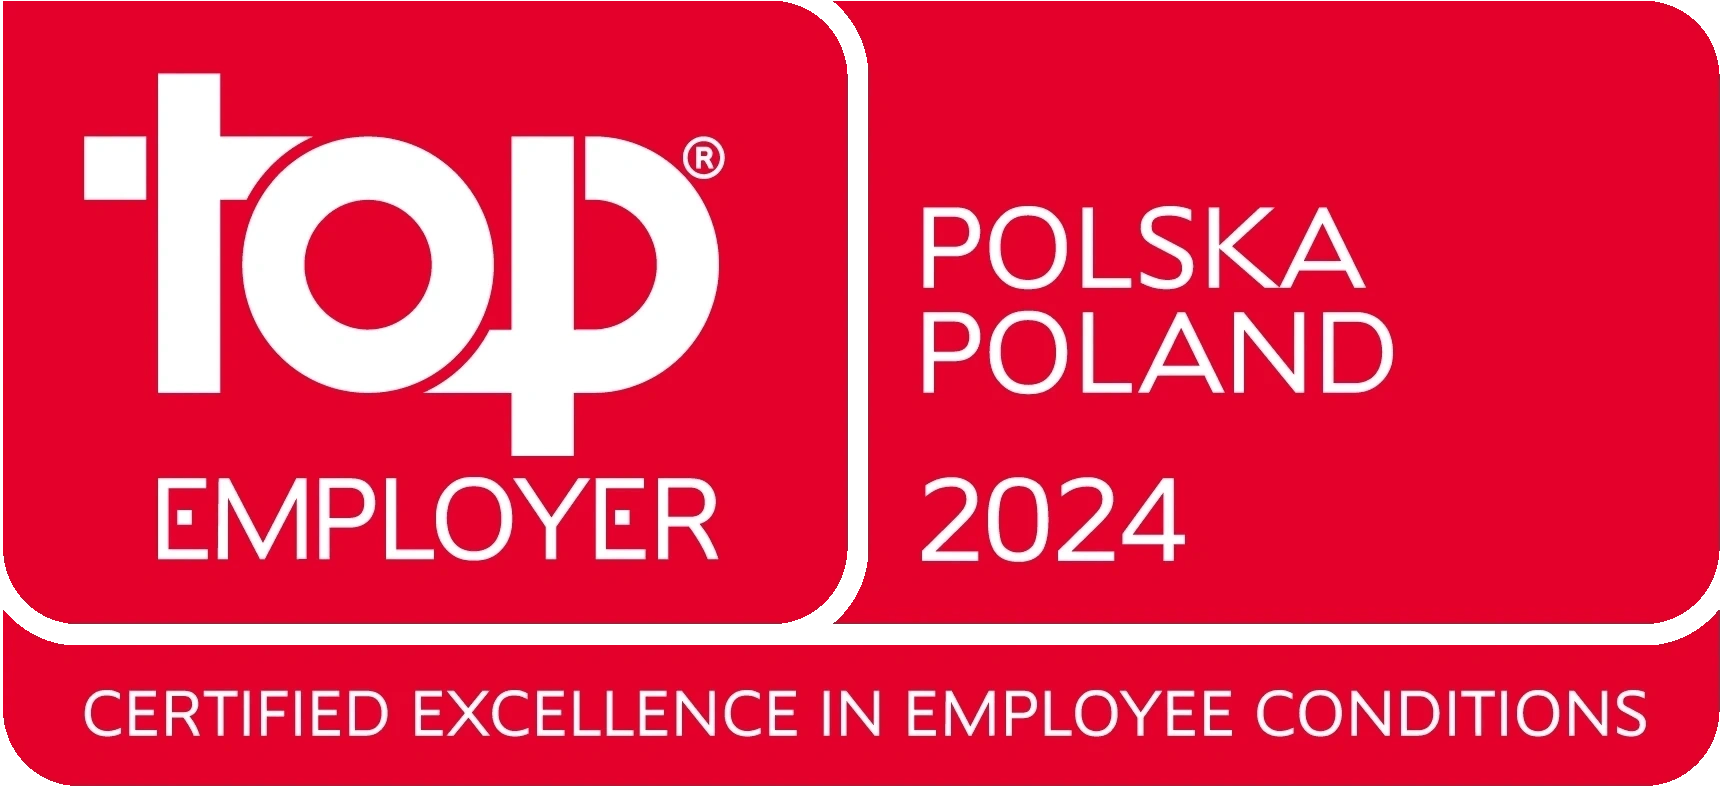 We are a Top Employer in Europe